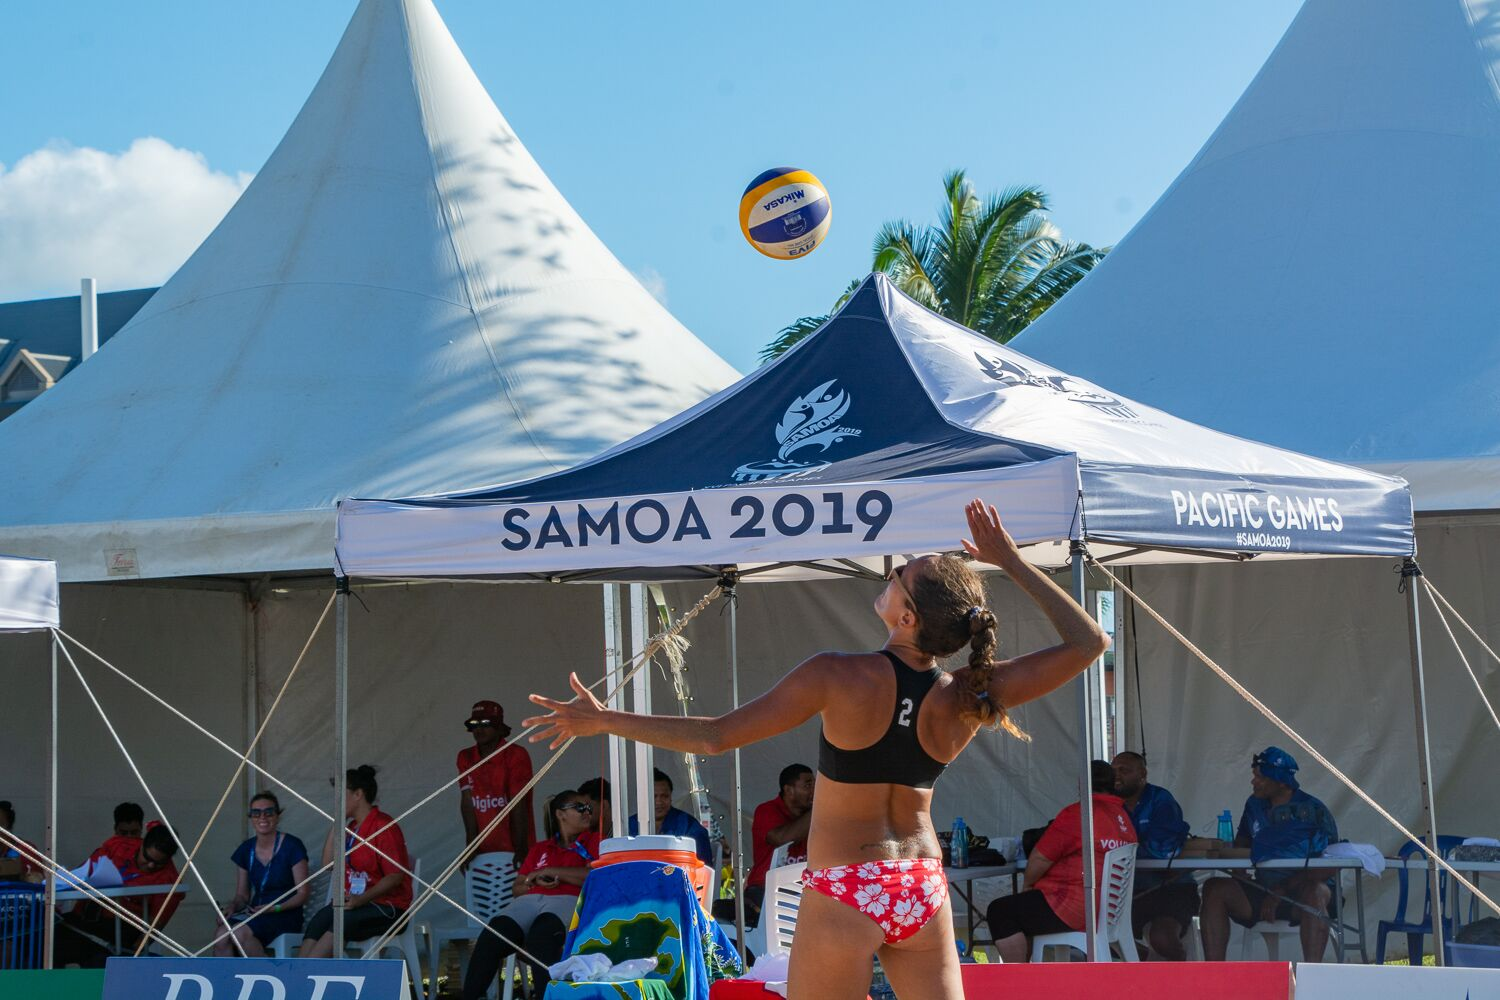 Samoa 2019: Day five of competition